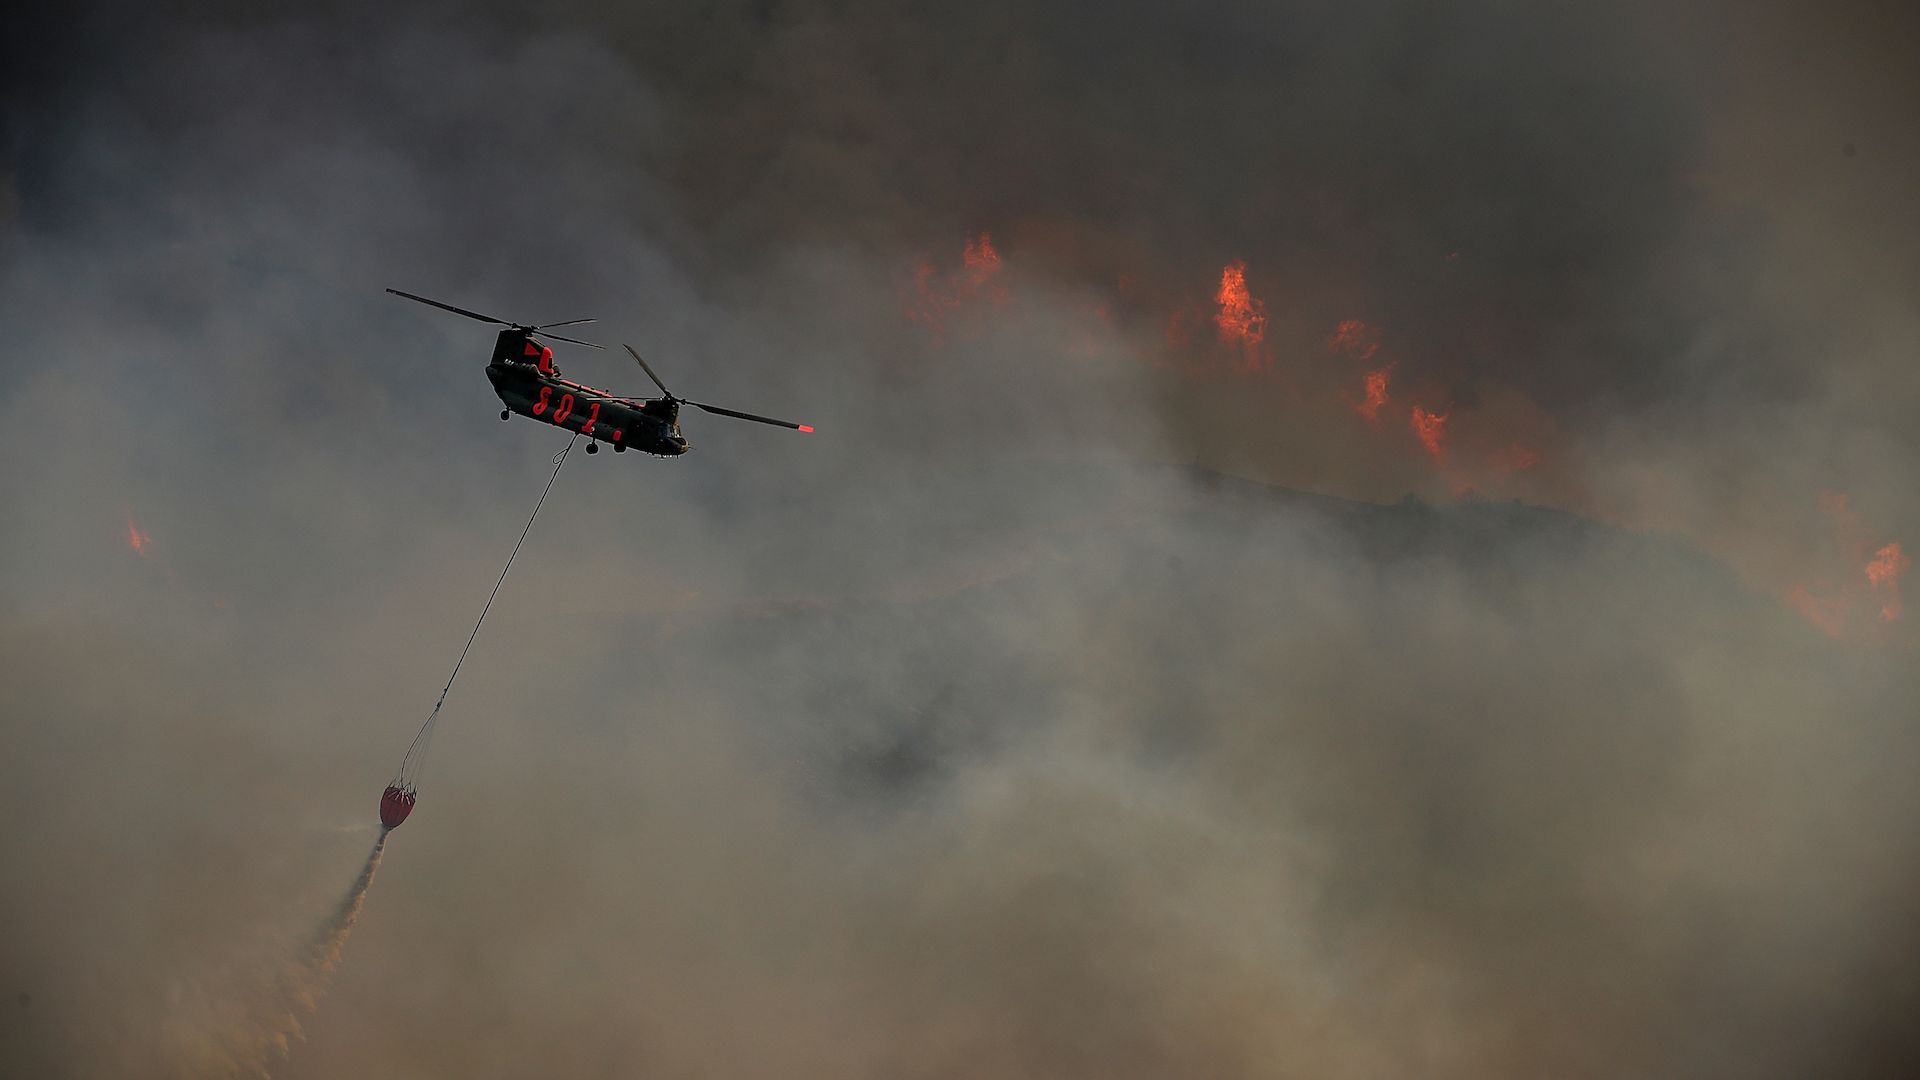 LAKEPORT, CA - JULY 31: A helicopter drops water on the River Fire as it burns through a canyon on July 31, 2018 in Lakeport, California.